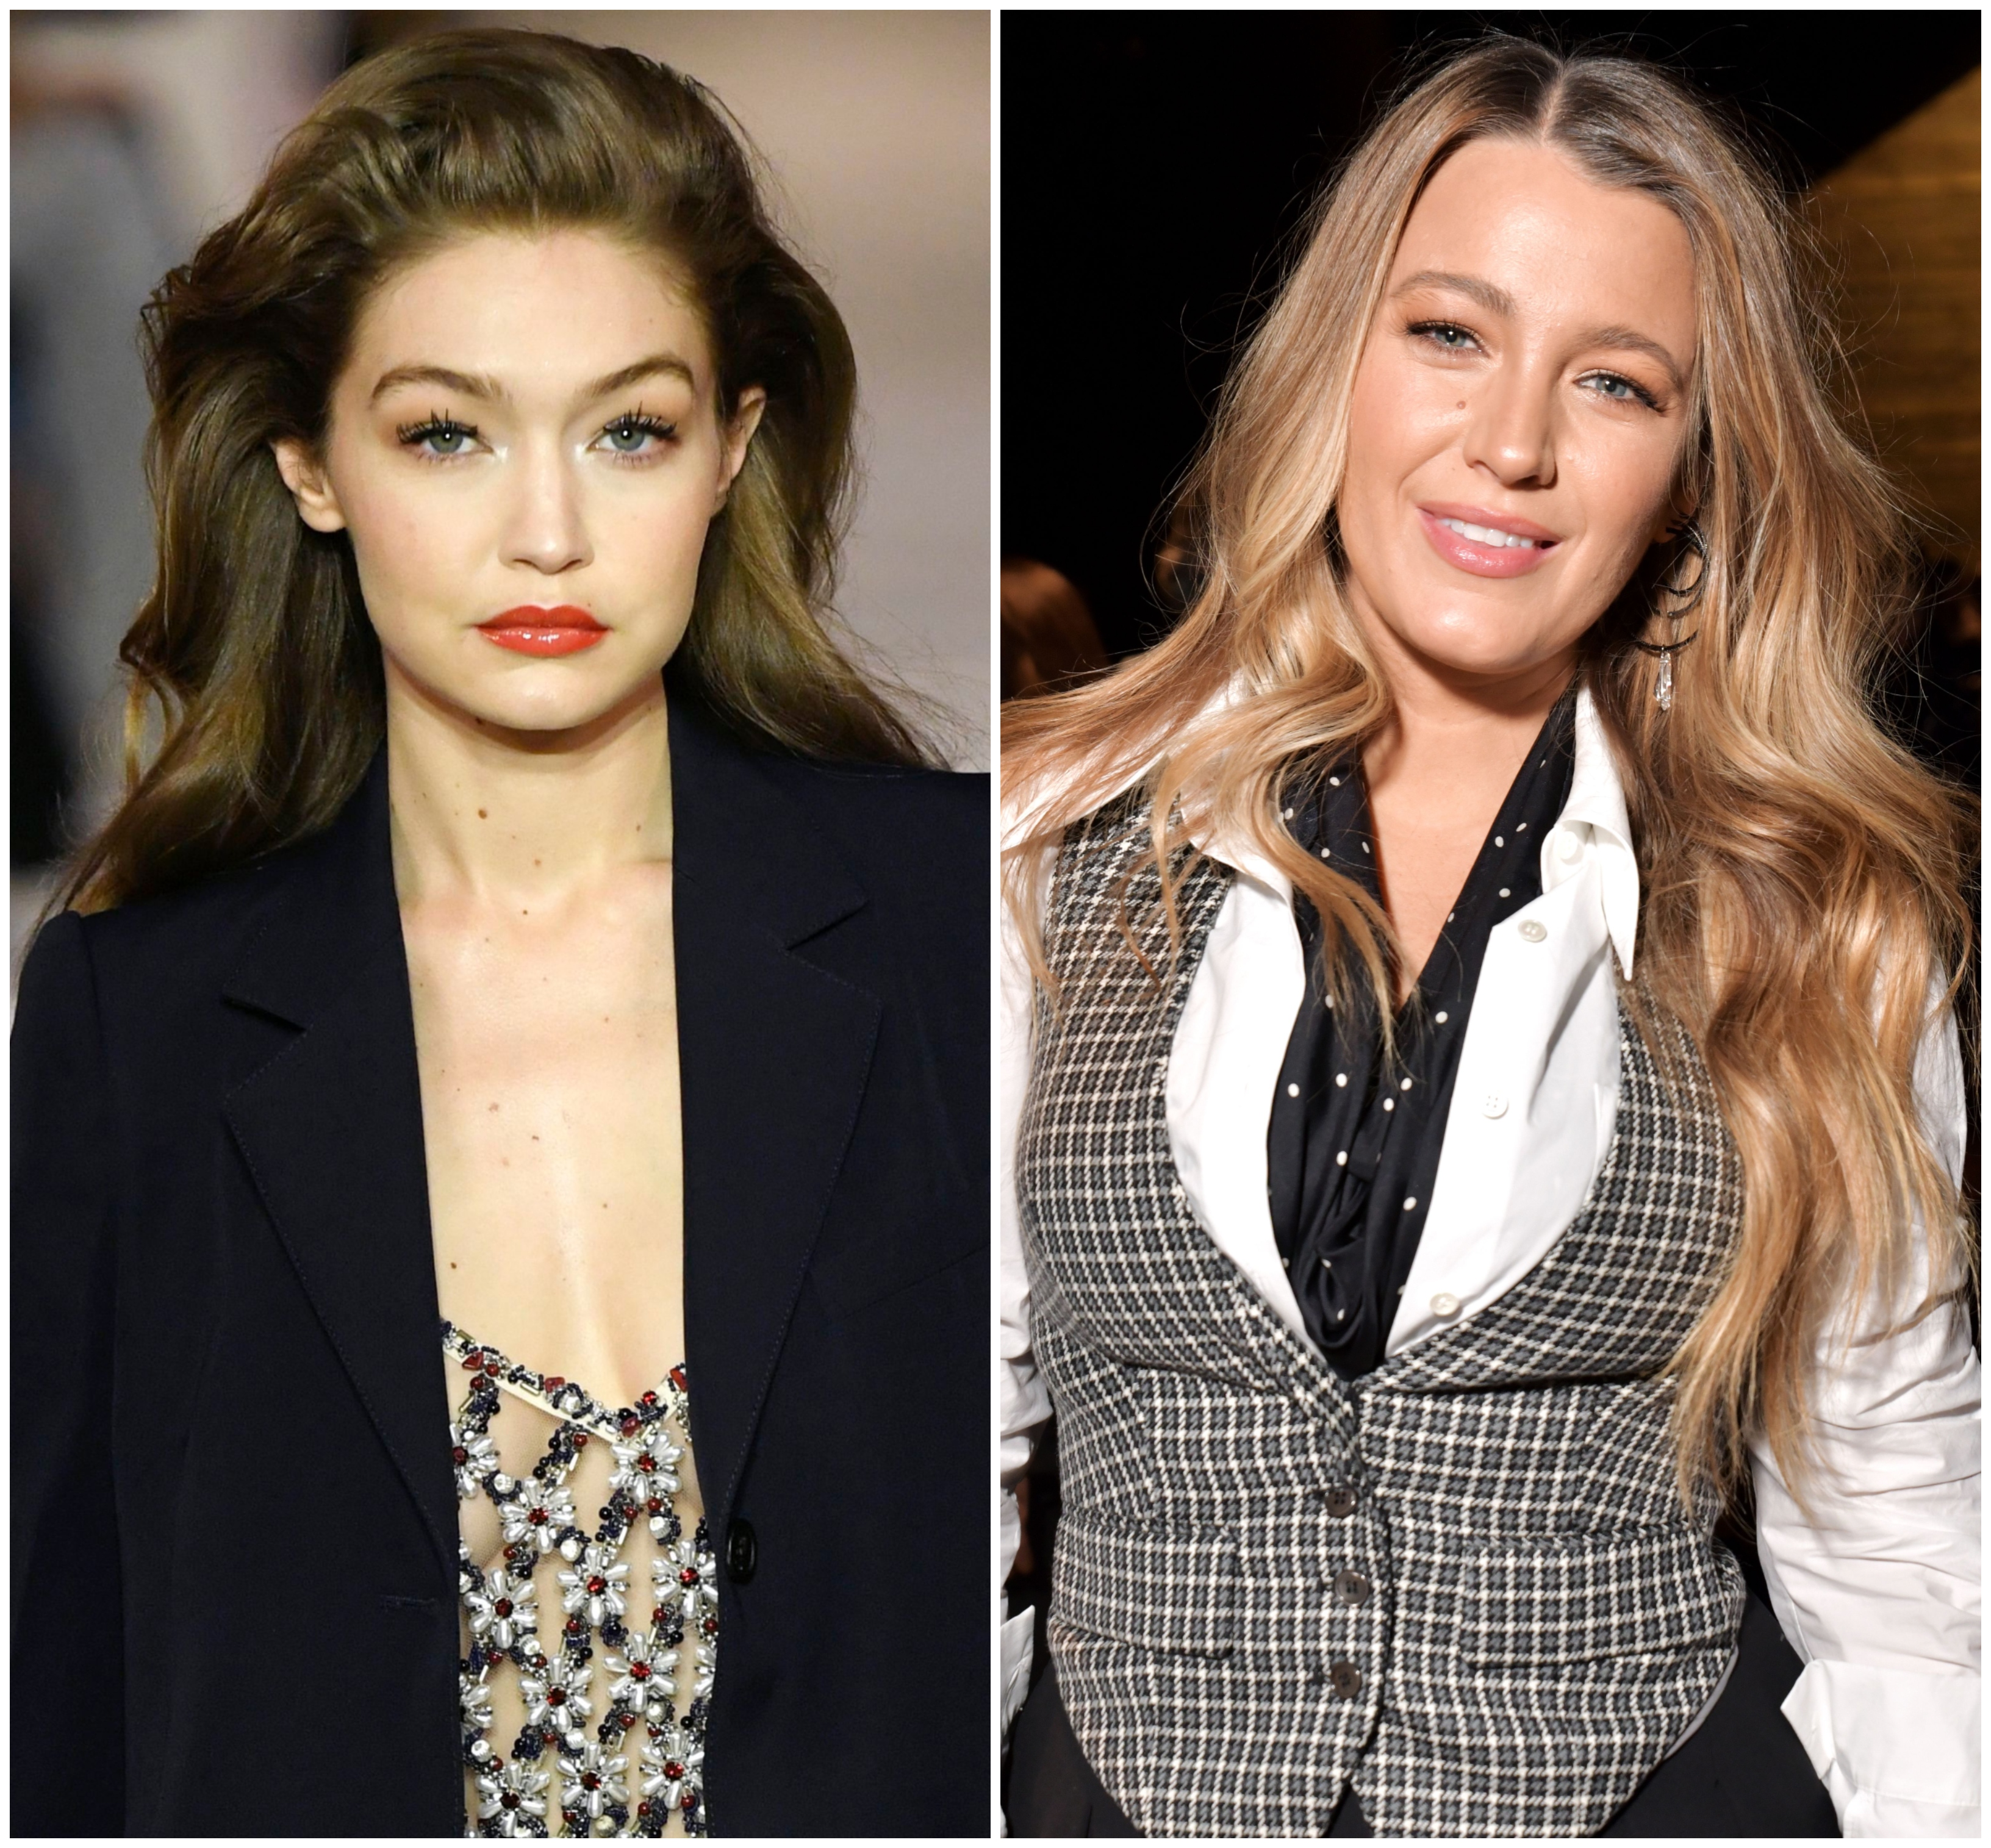 Gigi Hadid Loves Blake Lively's 'Hottest' Look at Michael Kors Show